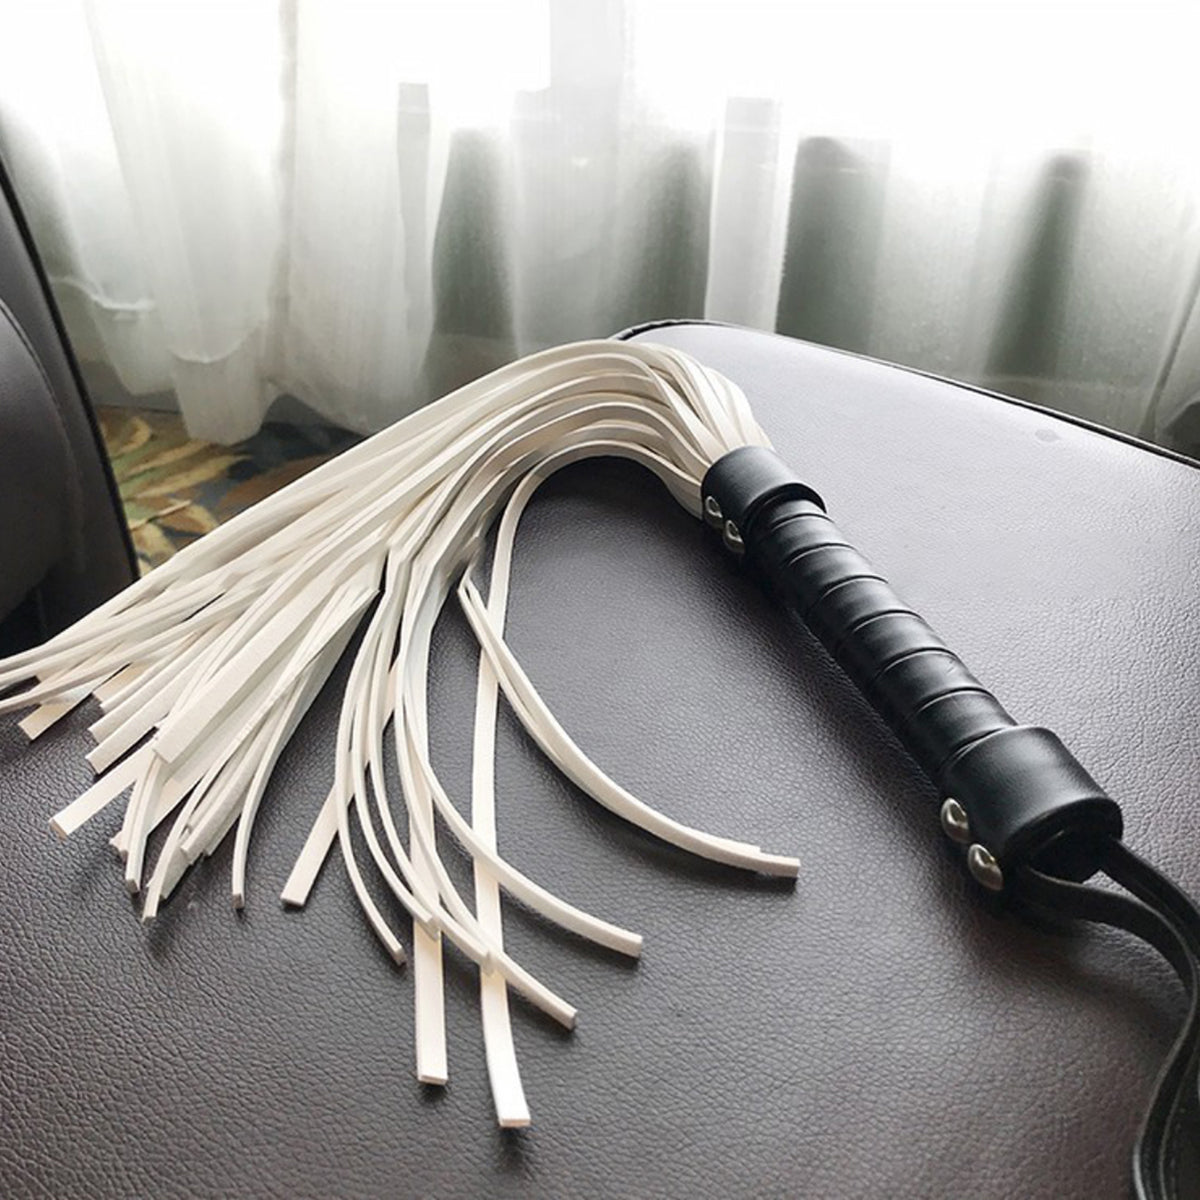 Strict Leather Horse Flogger